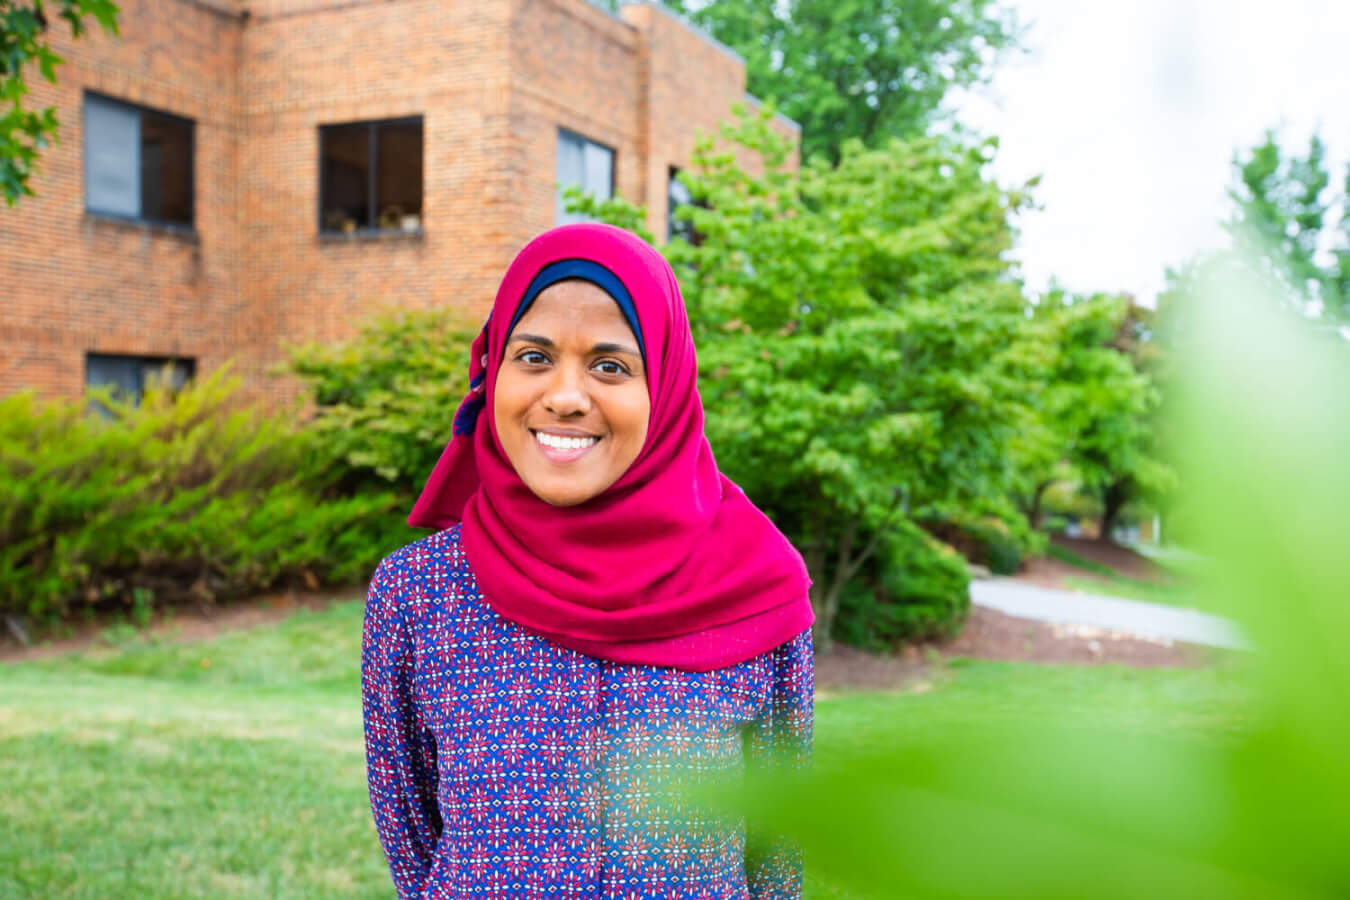 Preparing students for a diverse world Shenandoah welcomes new chaplain and Muslim community coordinator